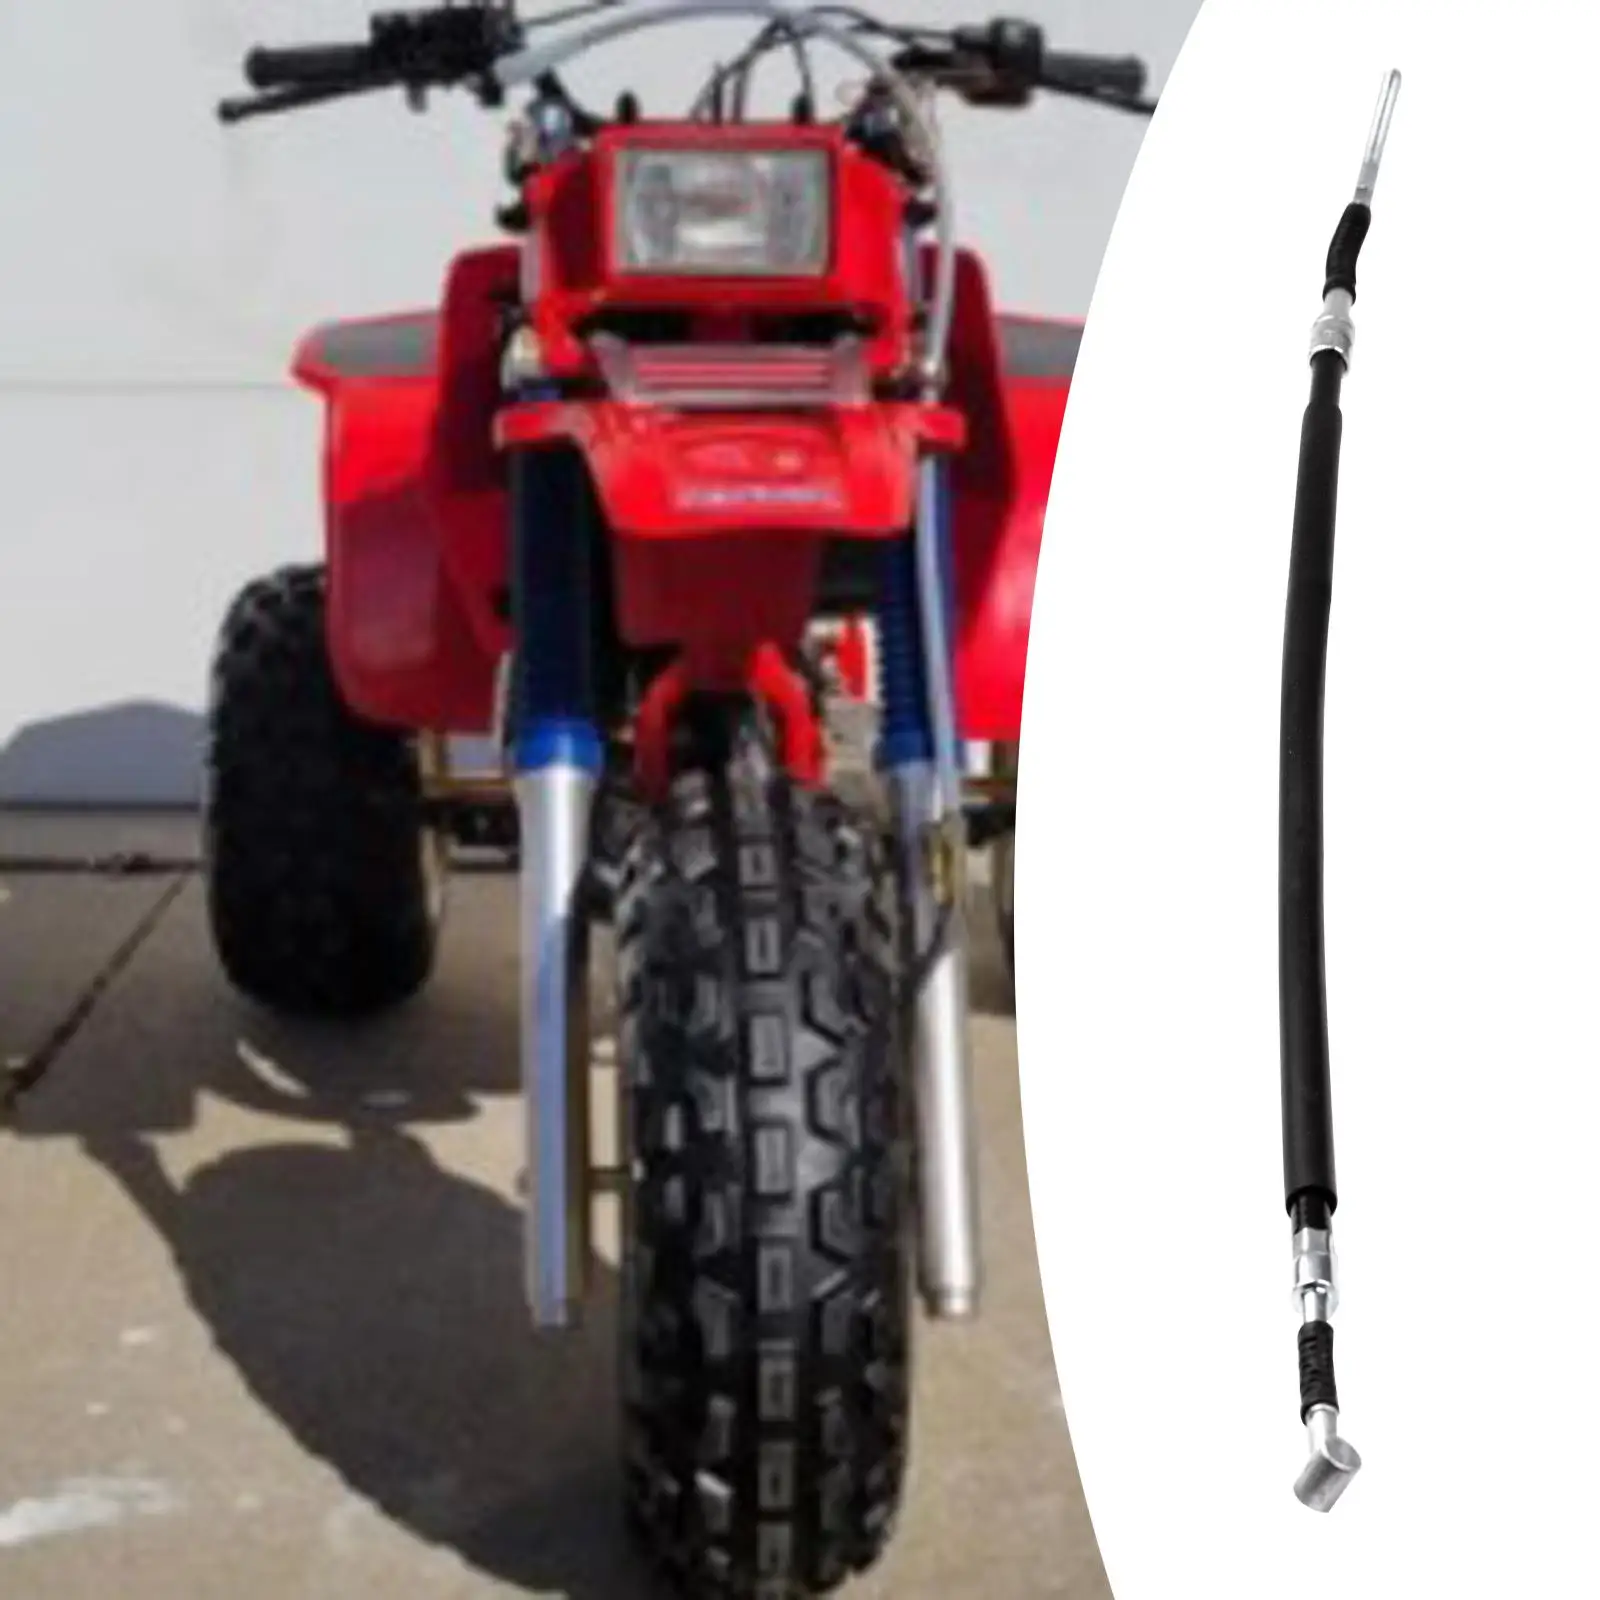 Foot Brake Cable Durable Supplies Easy to Install Direct Replaces Brake Rod for Honda Atc250ES 1985 Atc250SX 1985-1987